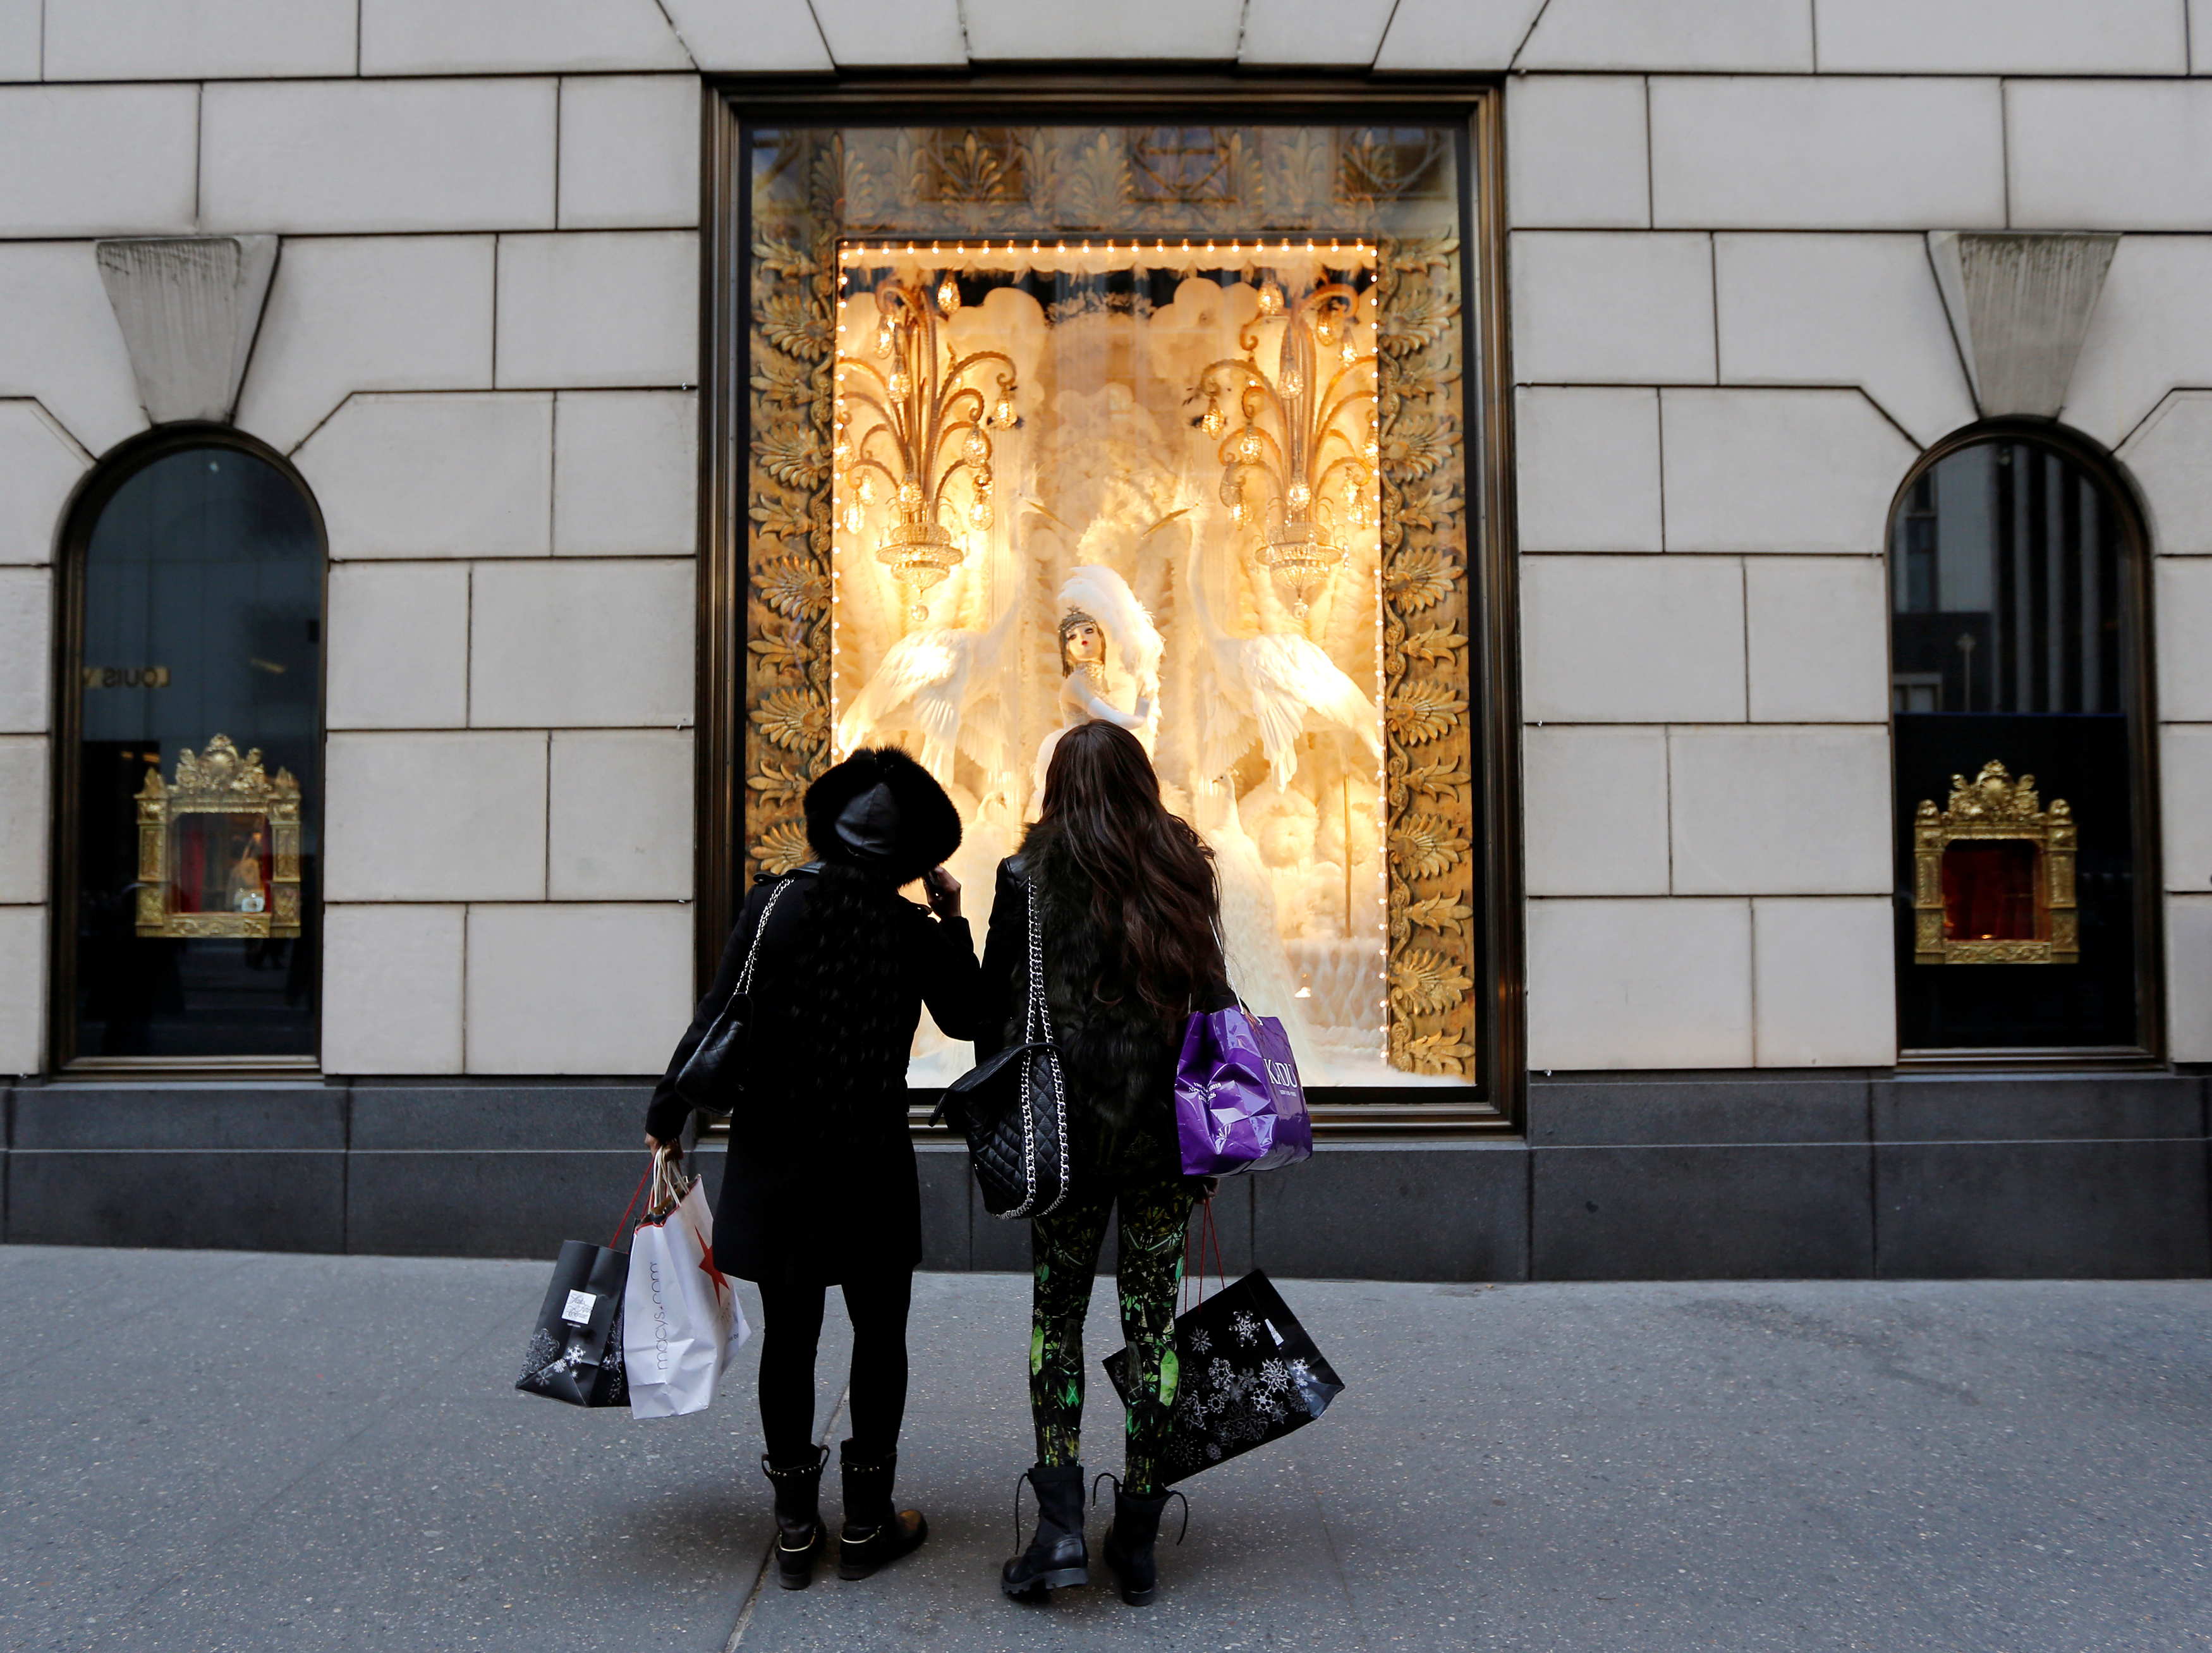 Holiday shoppers look at store windows at Henri Bendel store on 5th Avenue in New York November 23, 2012.  REUTERS/Brendan McDermid/Files